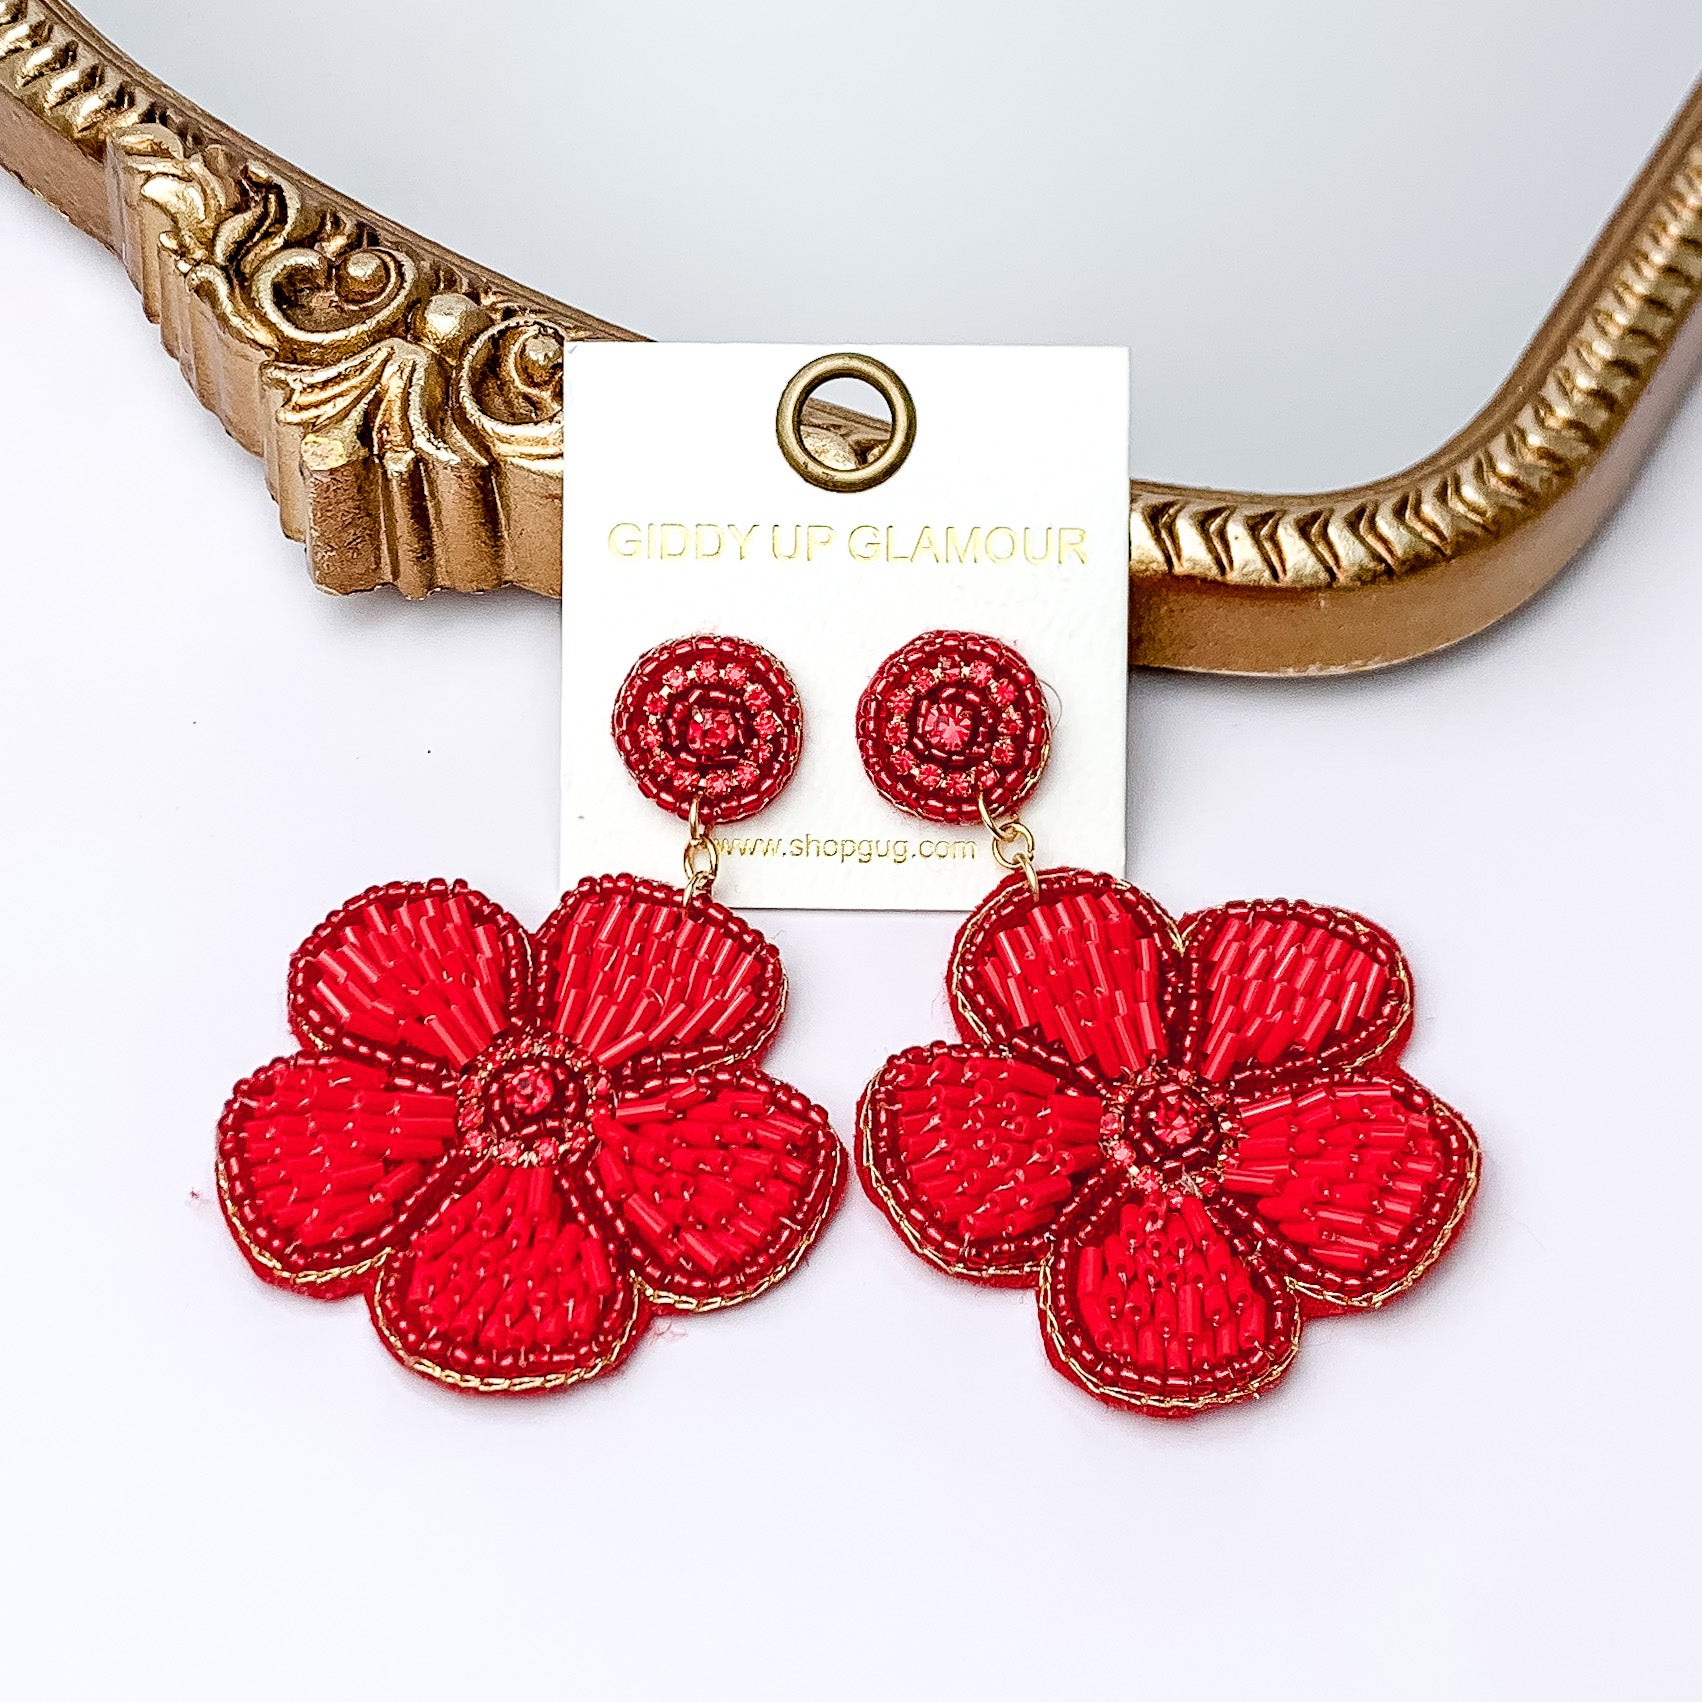 There is hanging beaded flower pendant from the gold stud earrings. The flower pendants are red with gold outline and detailing. These earrings are pictured in front of a gold mirror on a white background.